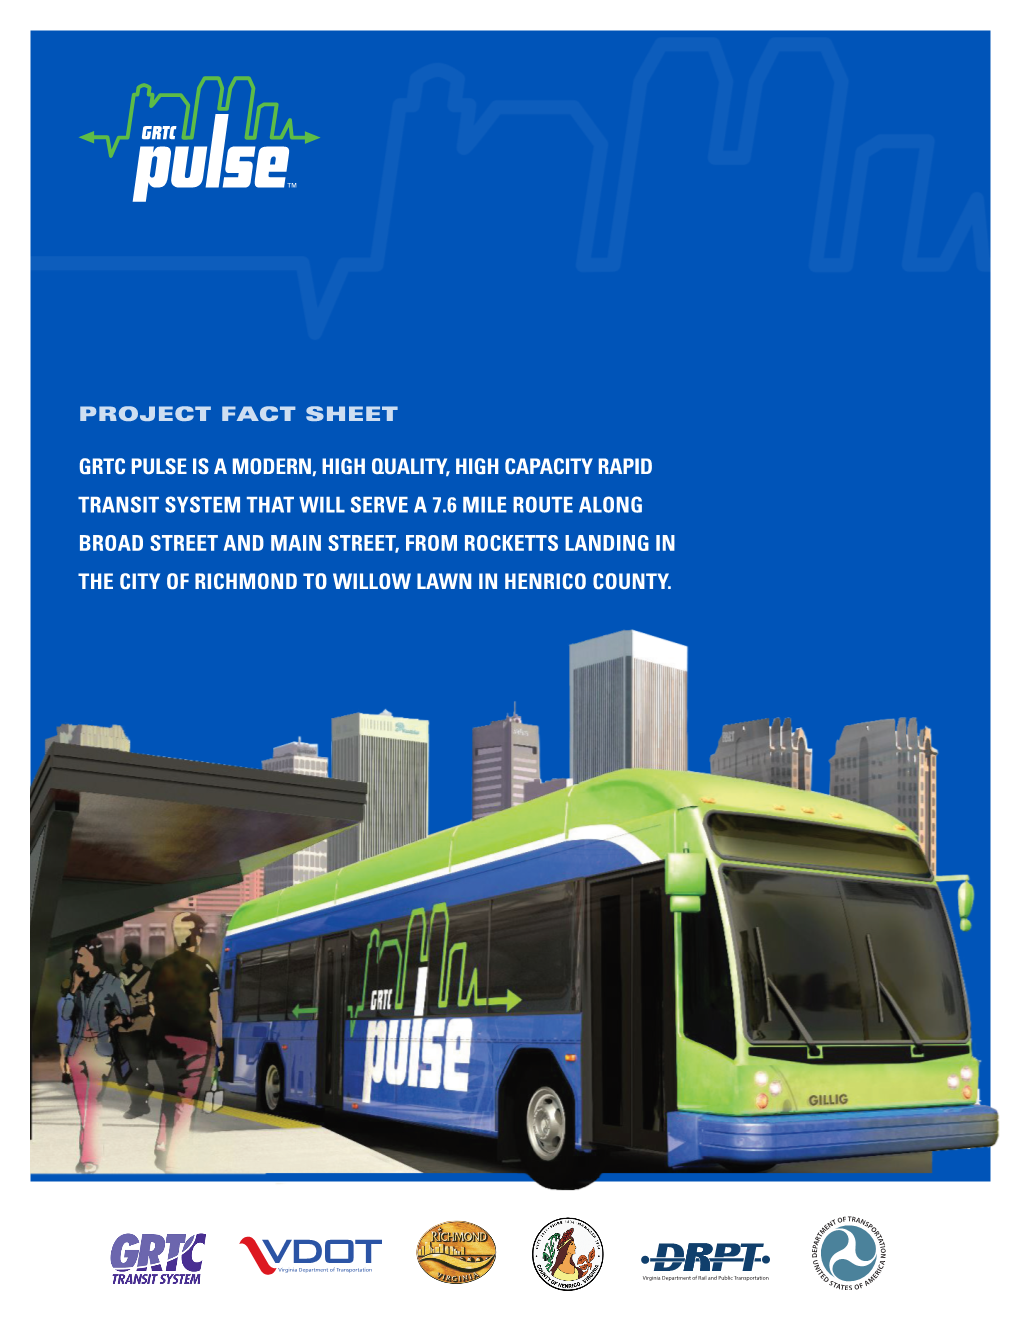 Grtc Pulse Is a Modern, High Quality, High Capacity Rapid